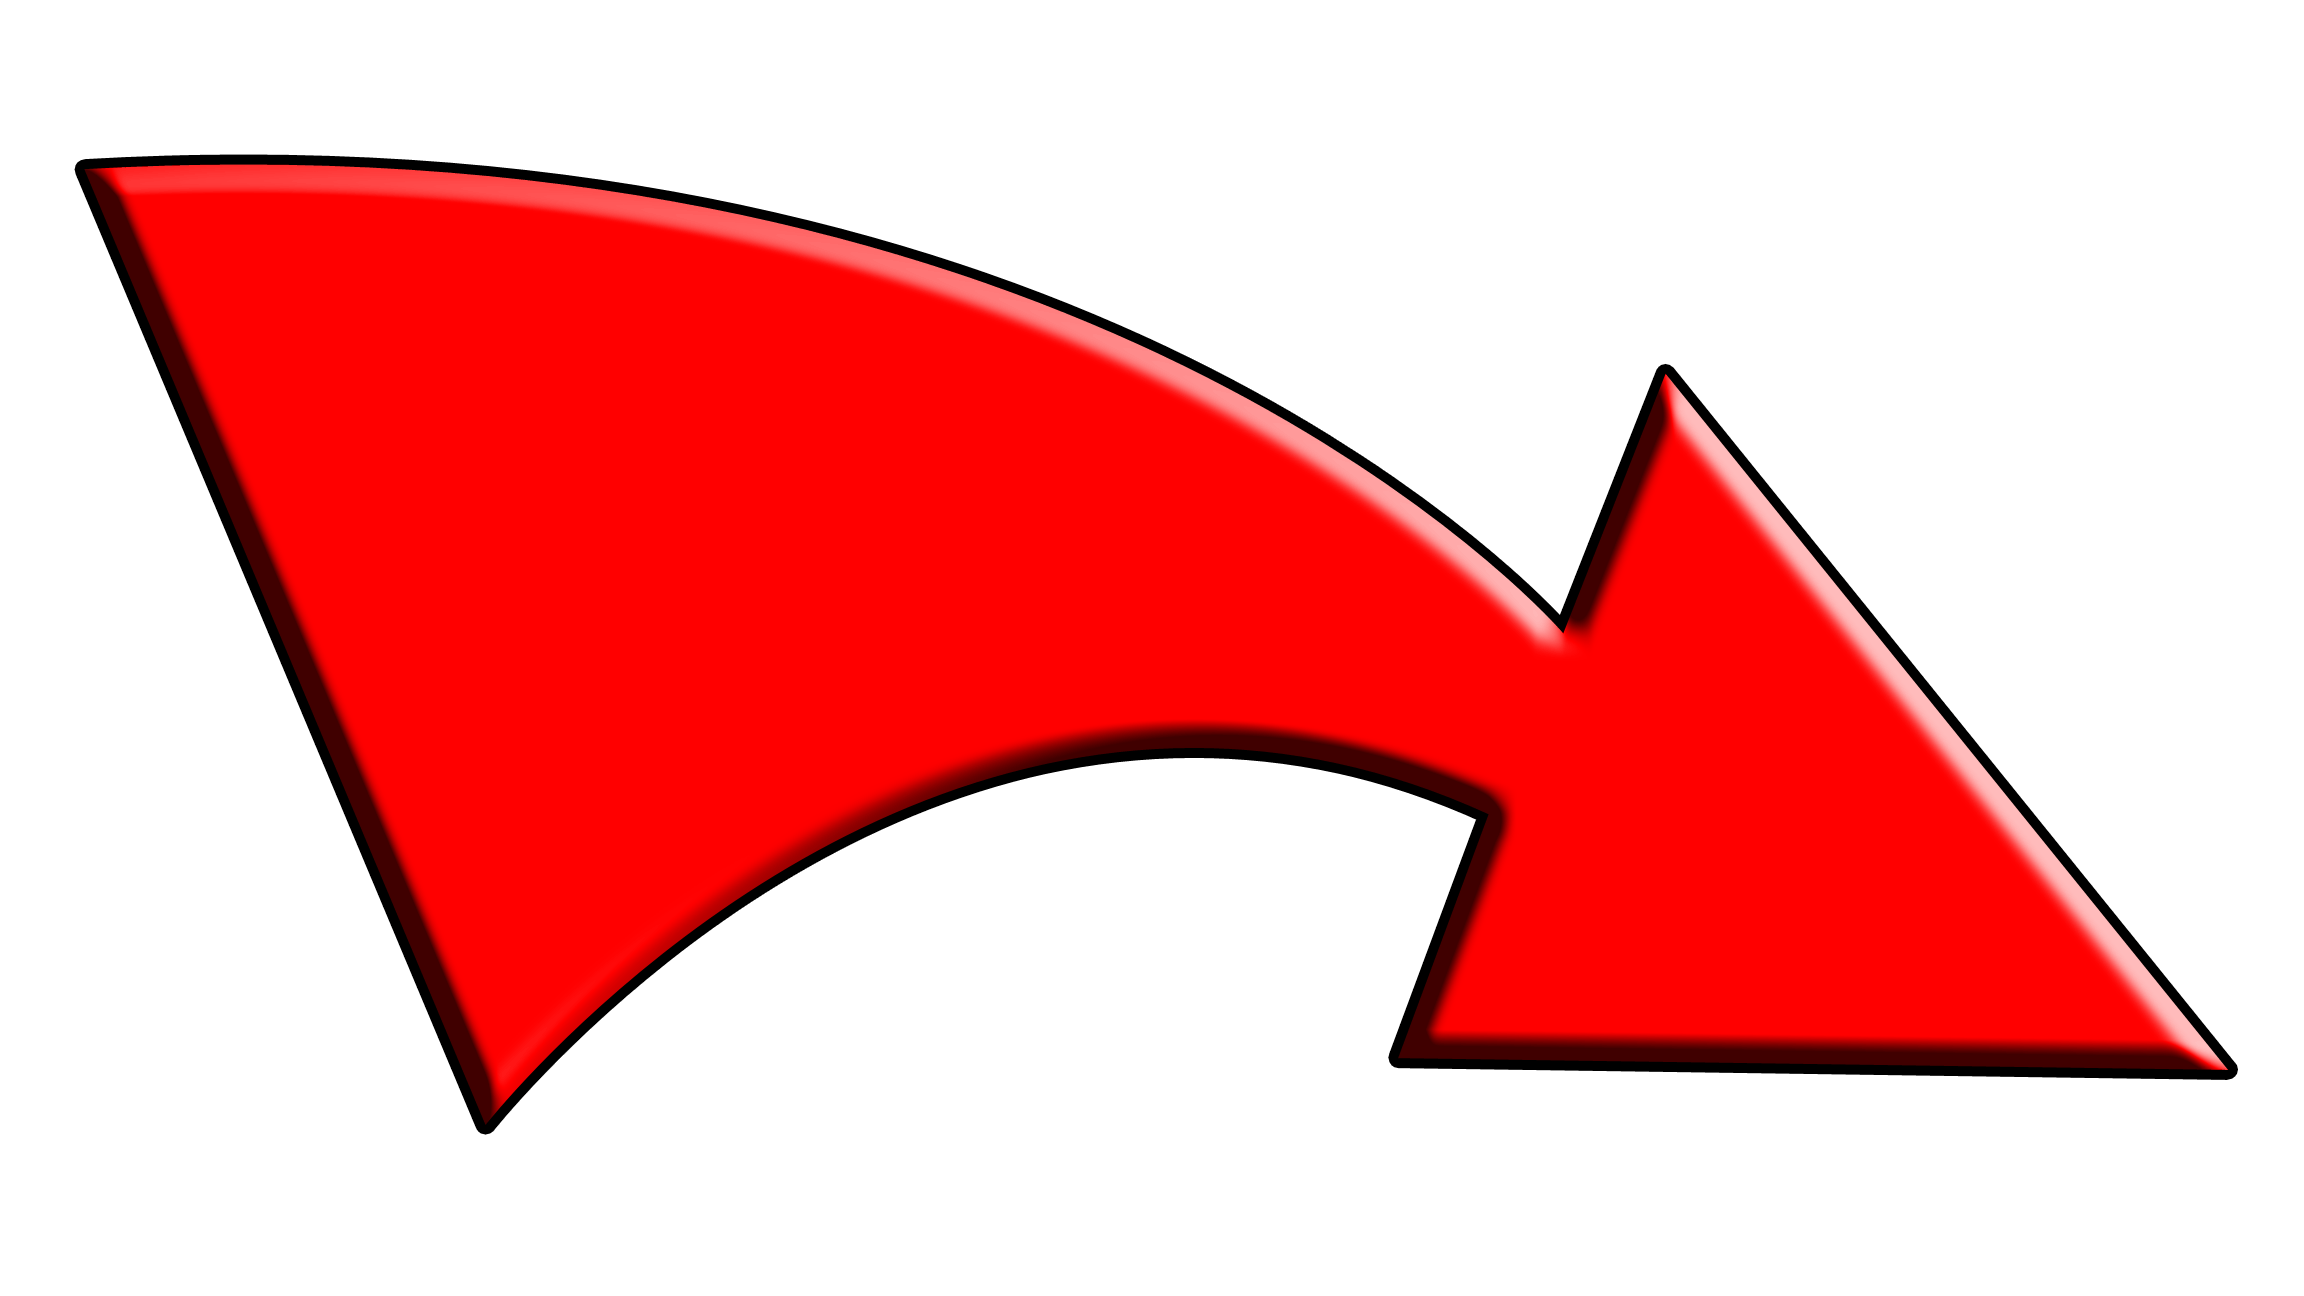 Transparent Arrow Logo - Download Free Red Arrow PNG Images - Free Icons and PNG Backgrounds